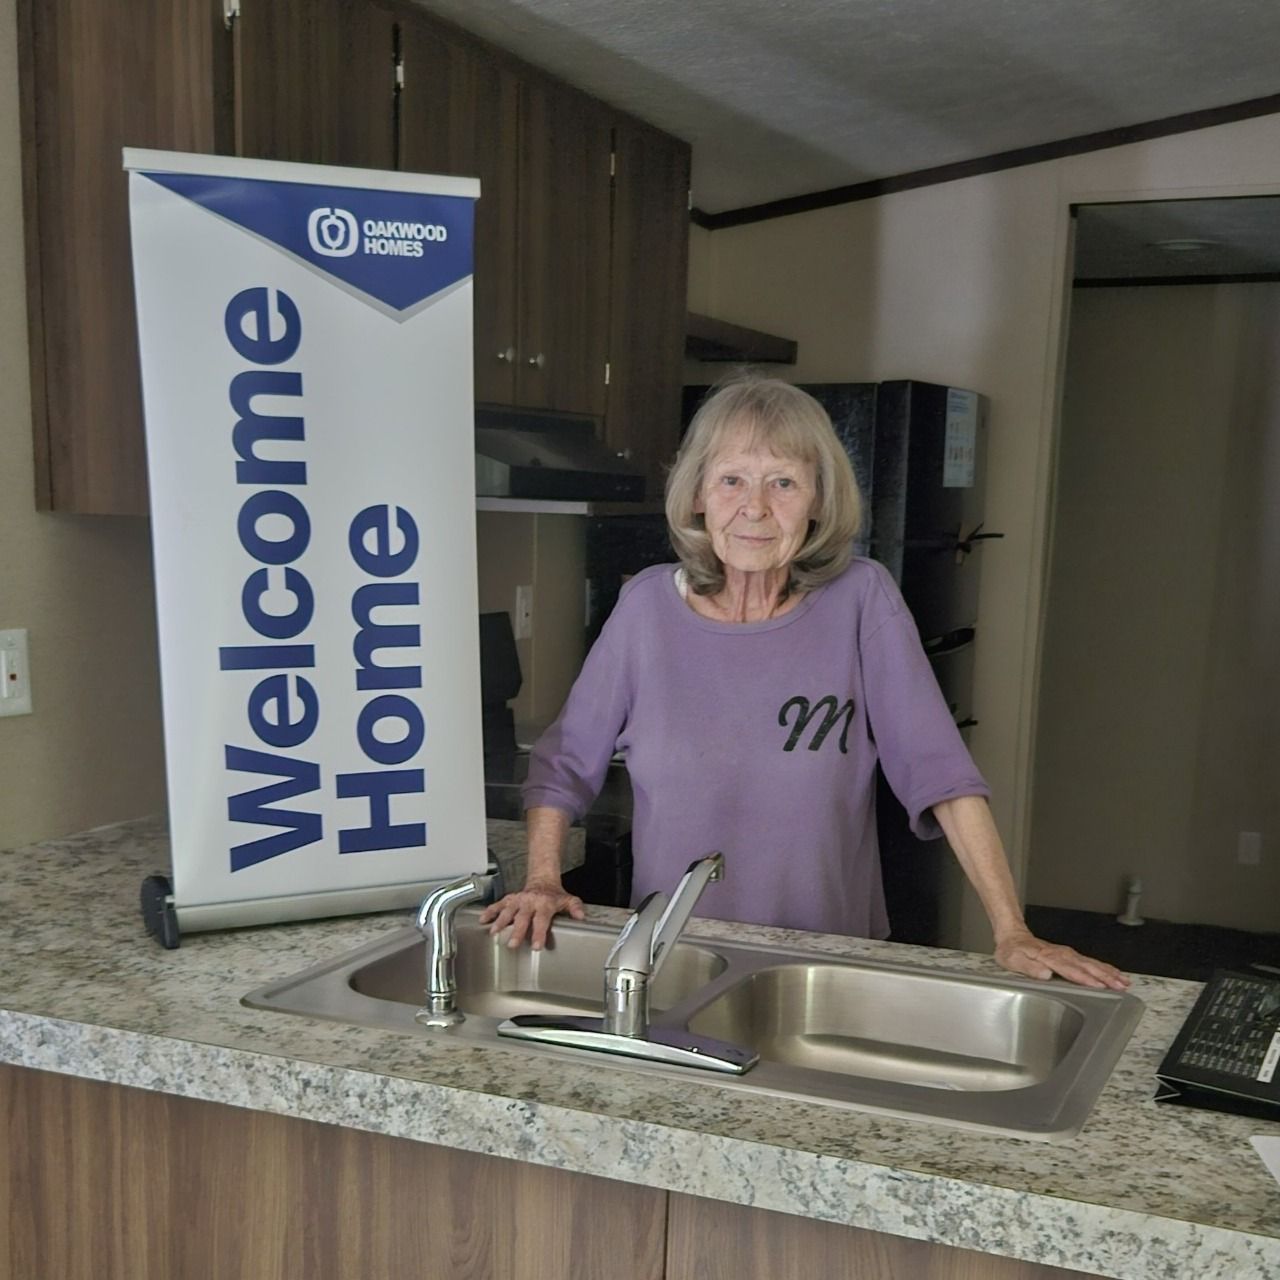 MARGARET S. welcome home image